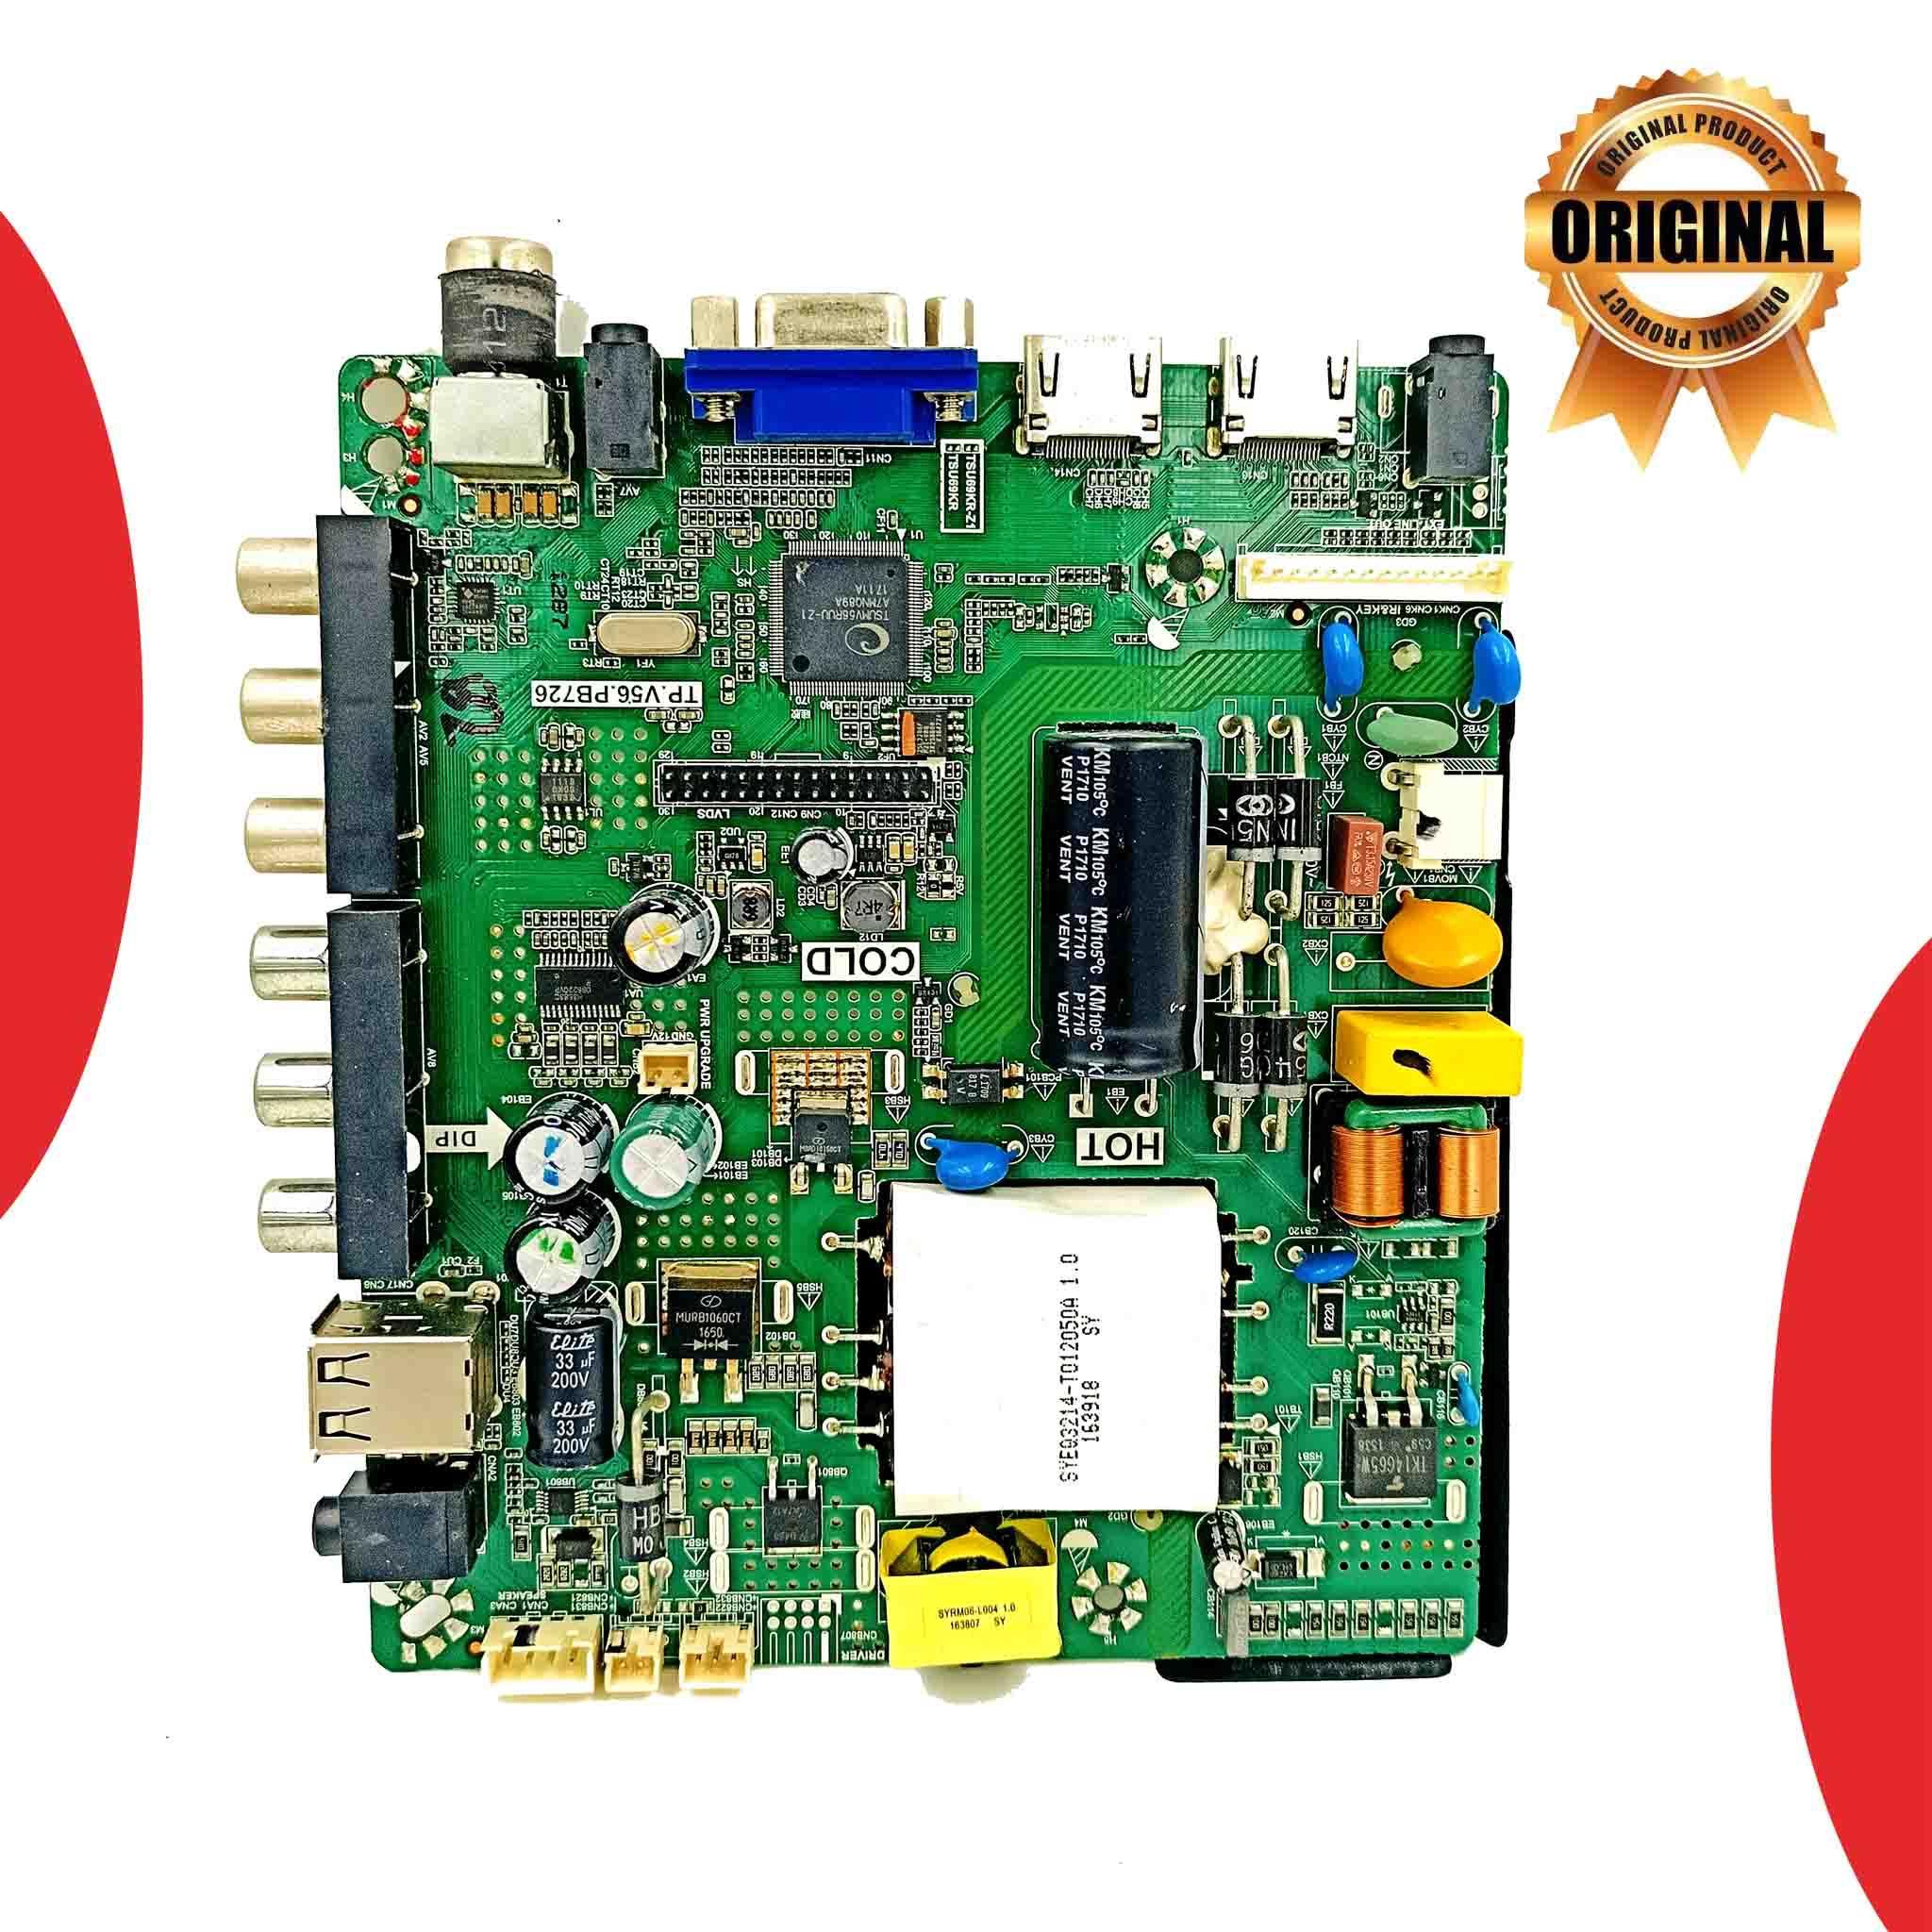 Reconnect 43 inch LED TV Motherboard for Model 43F43A2 - Great Bharat Electronics